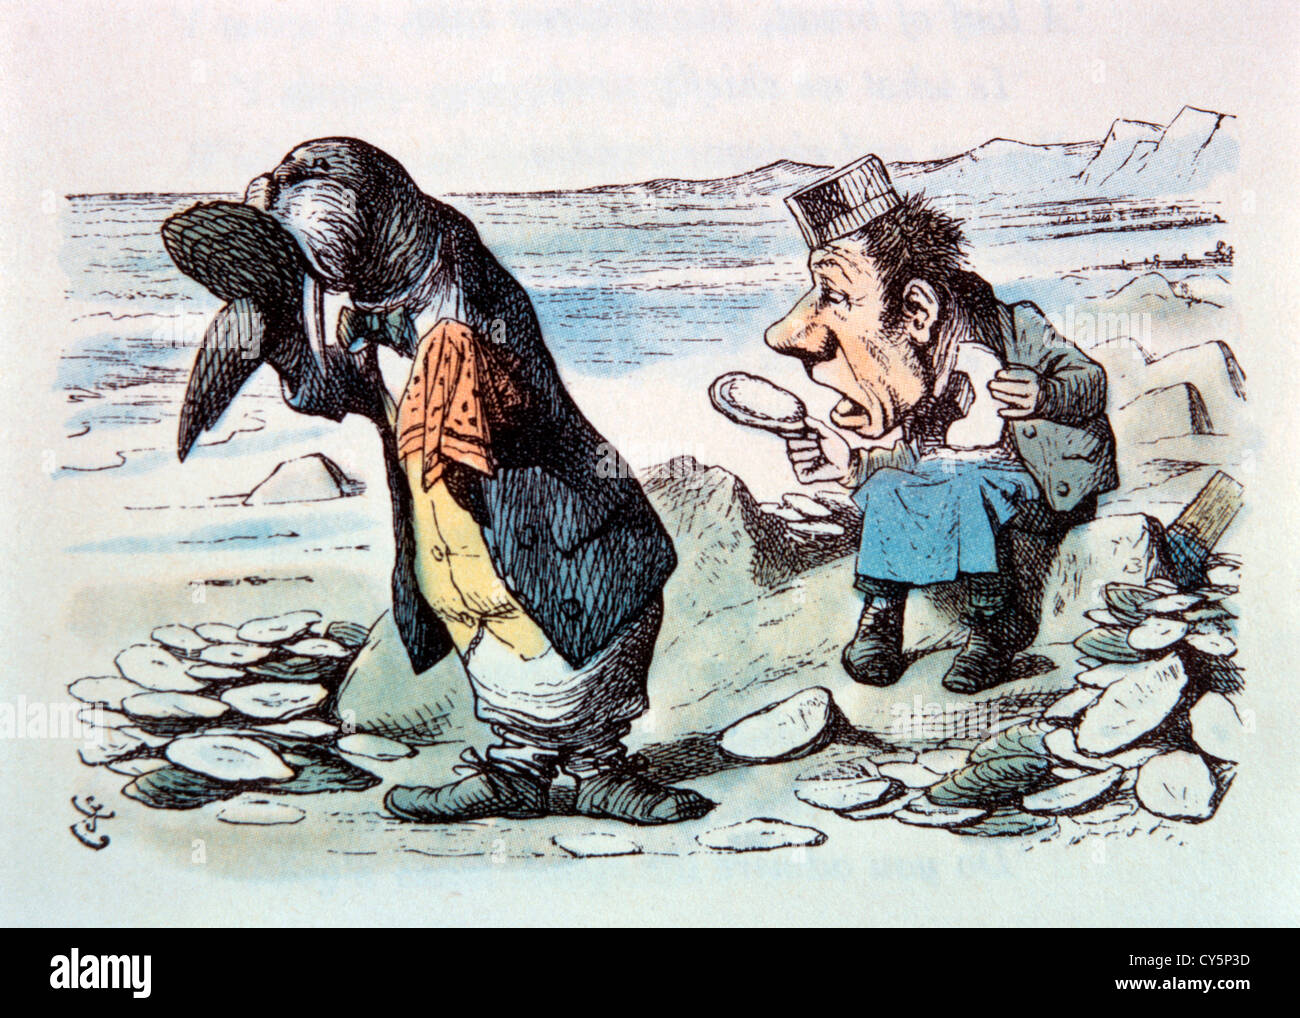 The Walrus and The Carpenter, Through the Looking Glass by Lewis Carroll, Hand-Colored Illustration, Circa 1872 Stock Photo